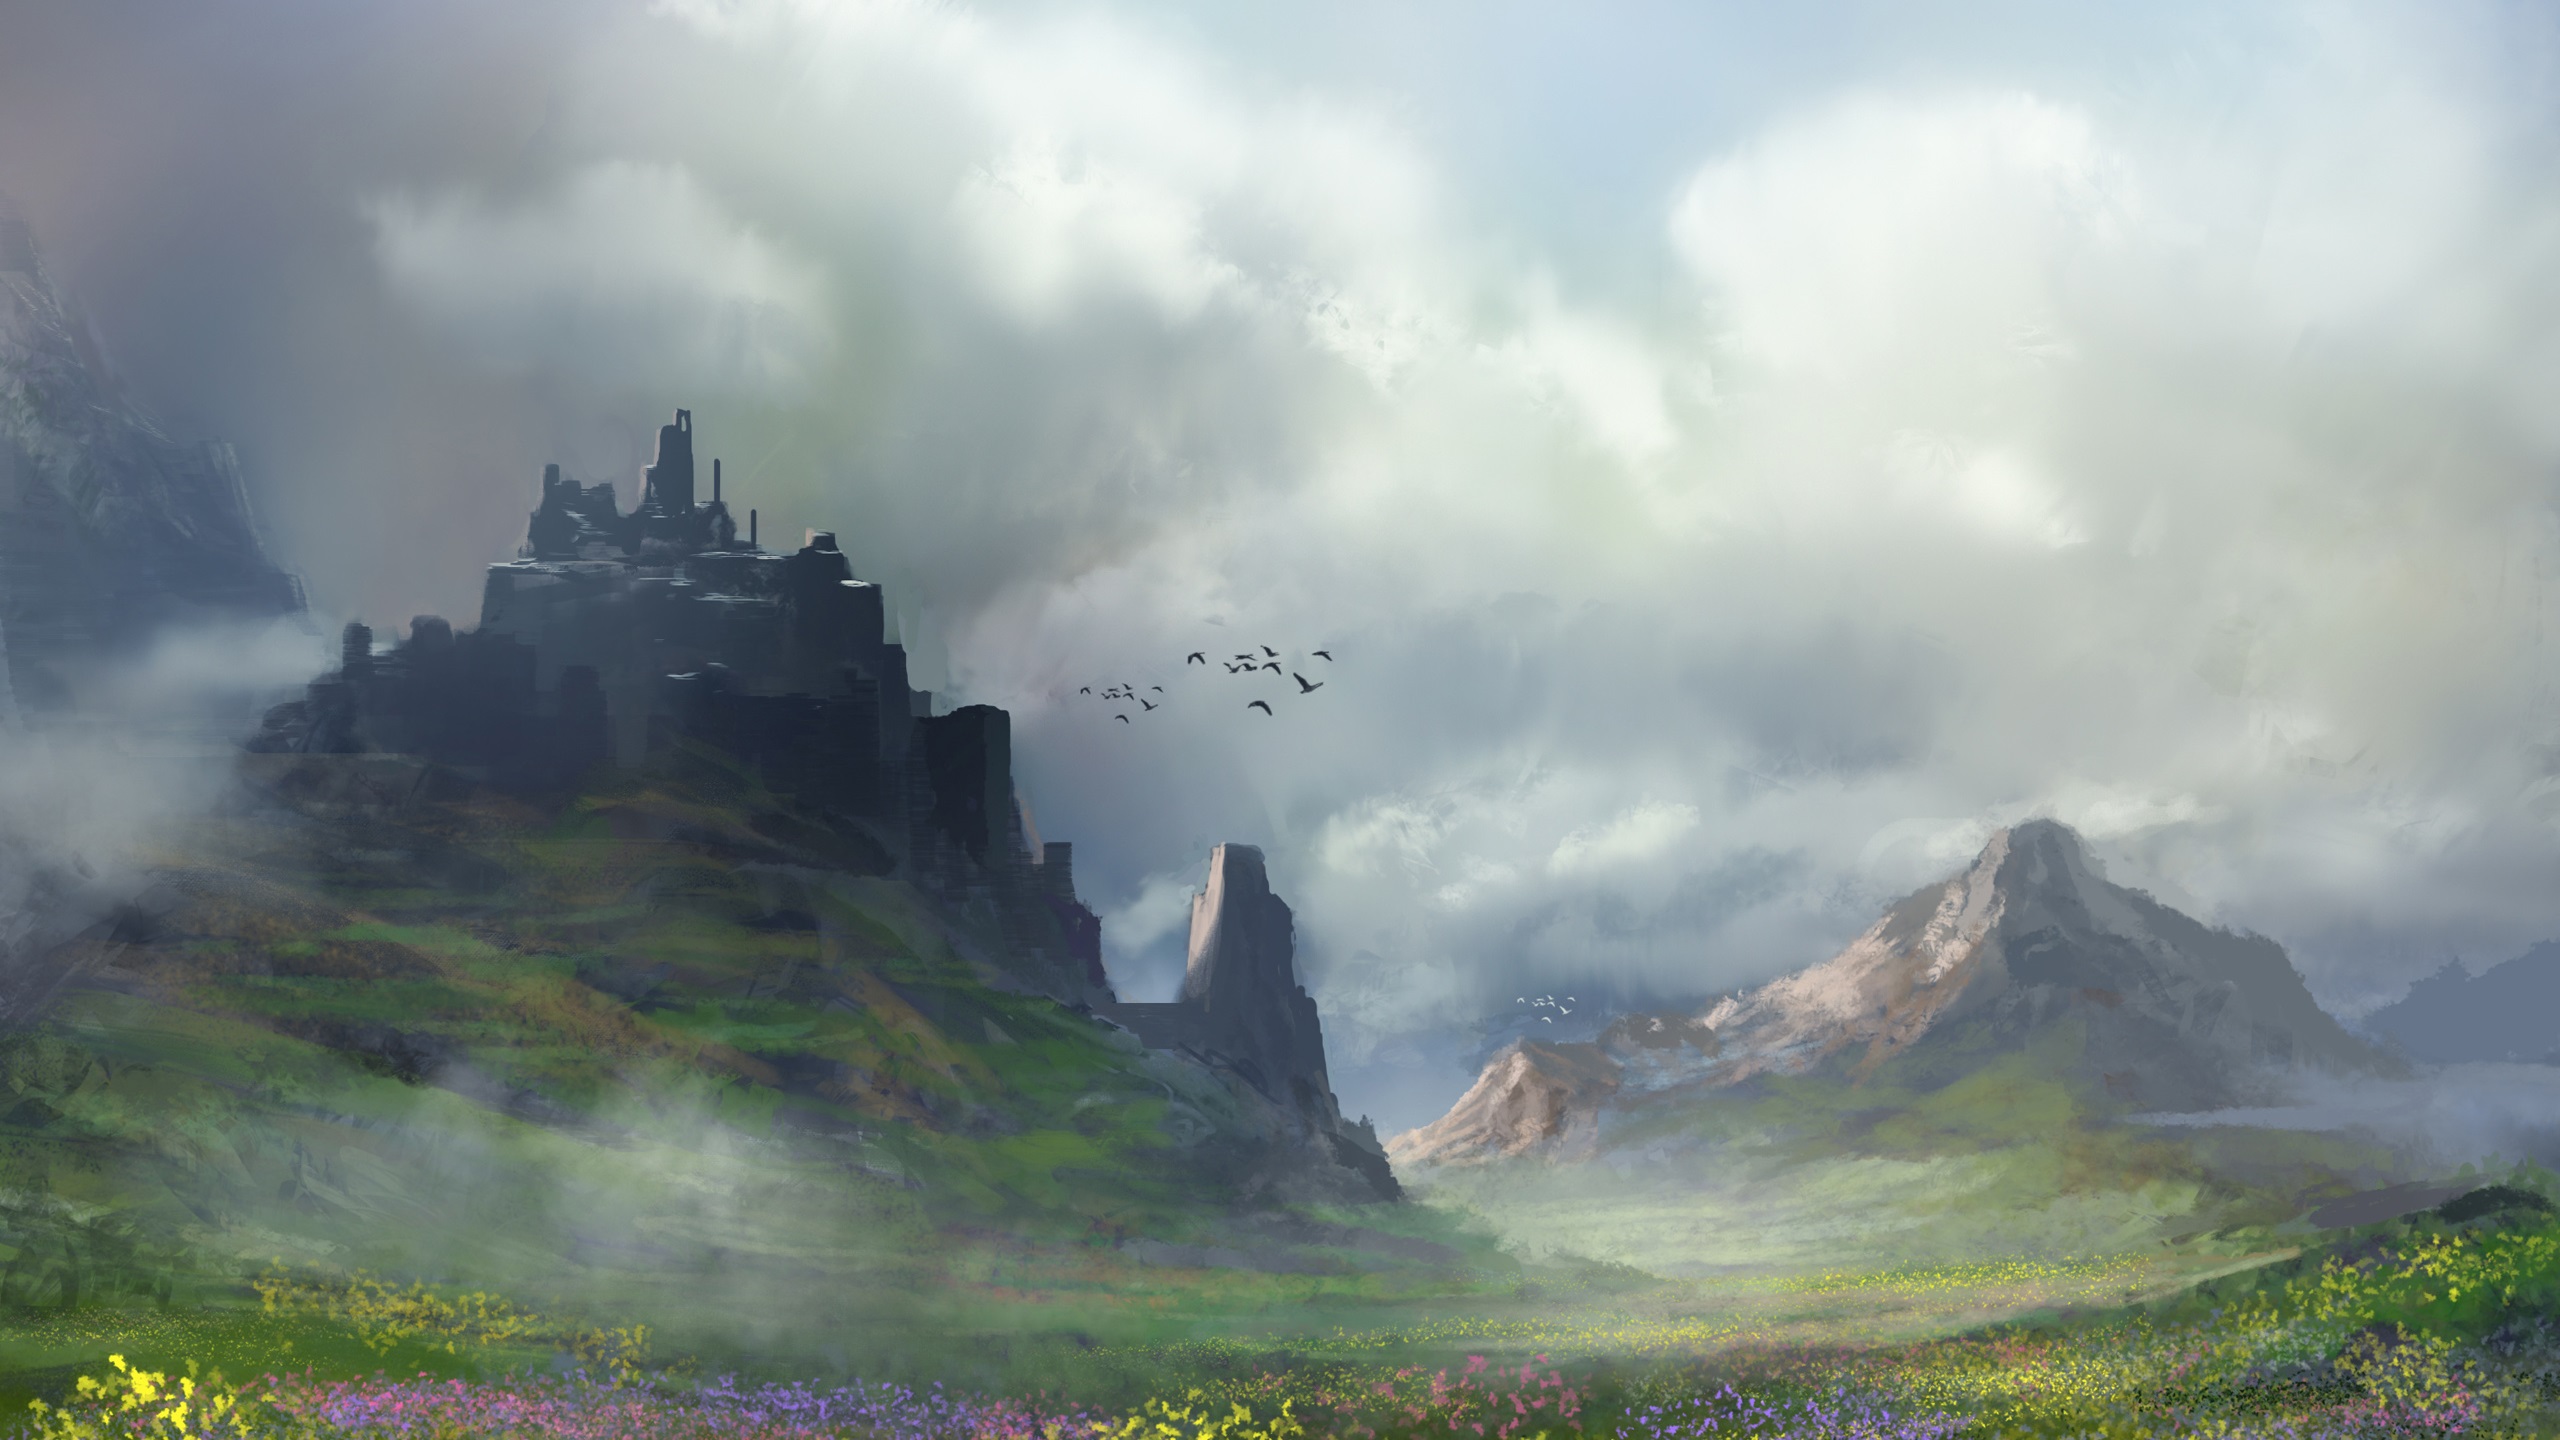 General 2560x1440 painting nature rocks clouds birds grass flowers daylight landscape mountains